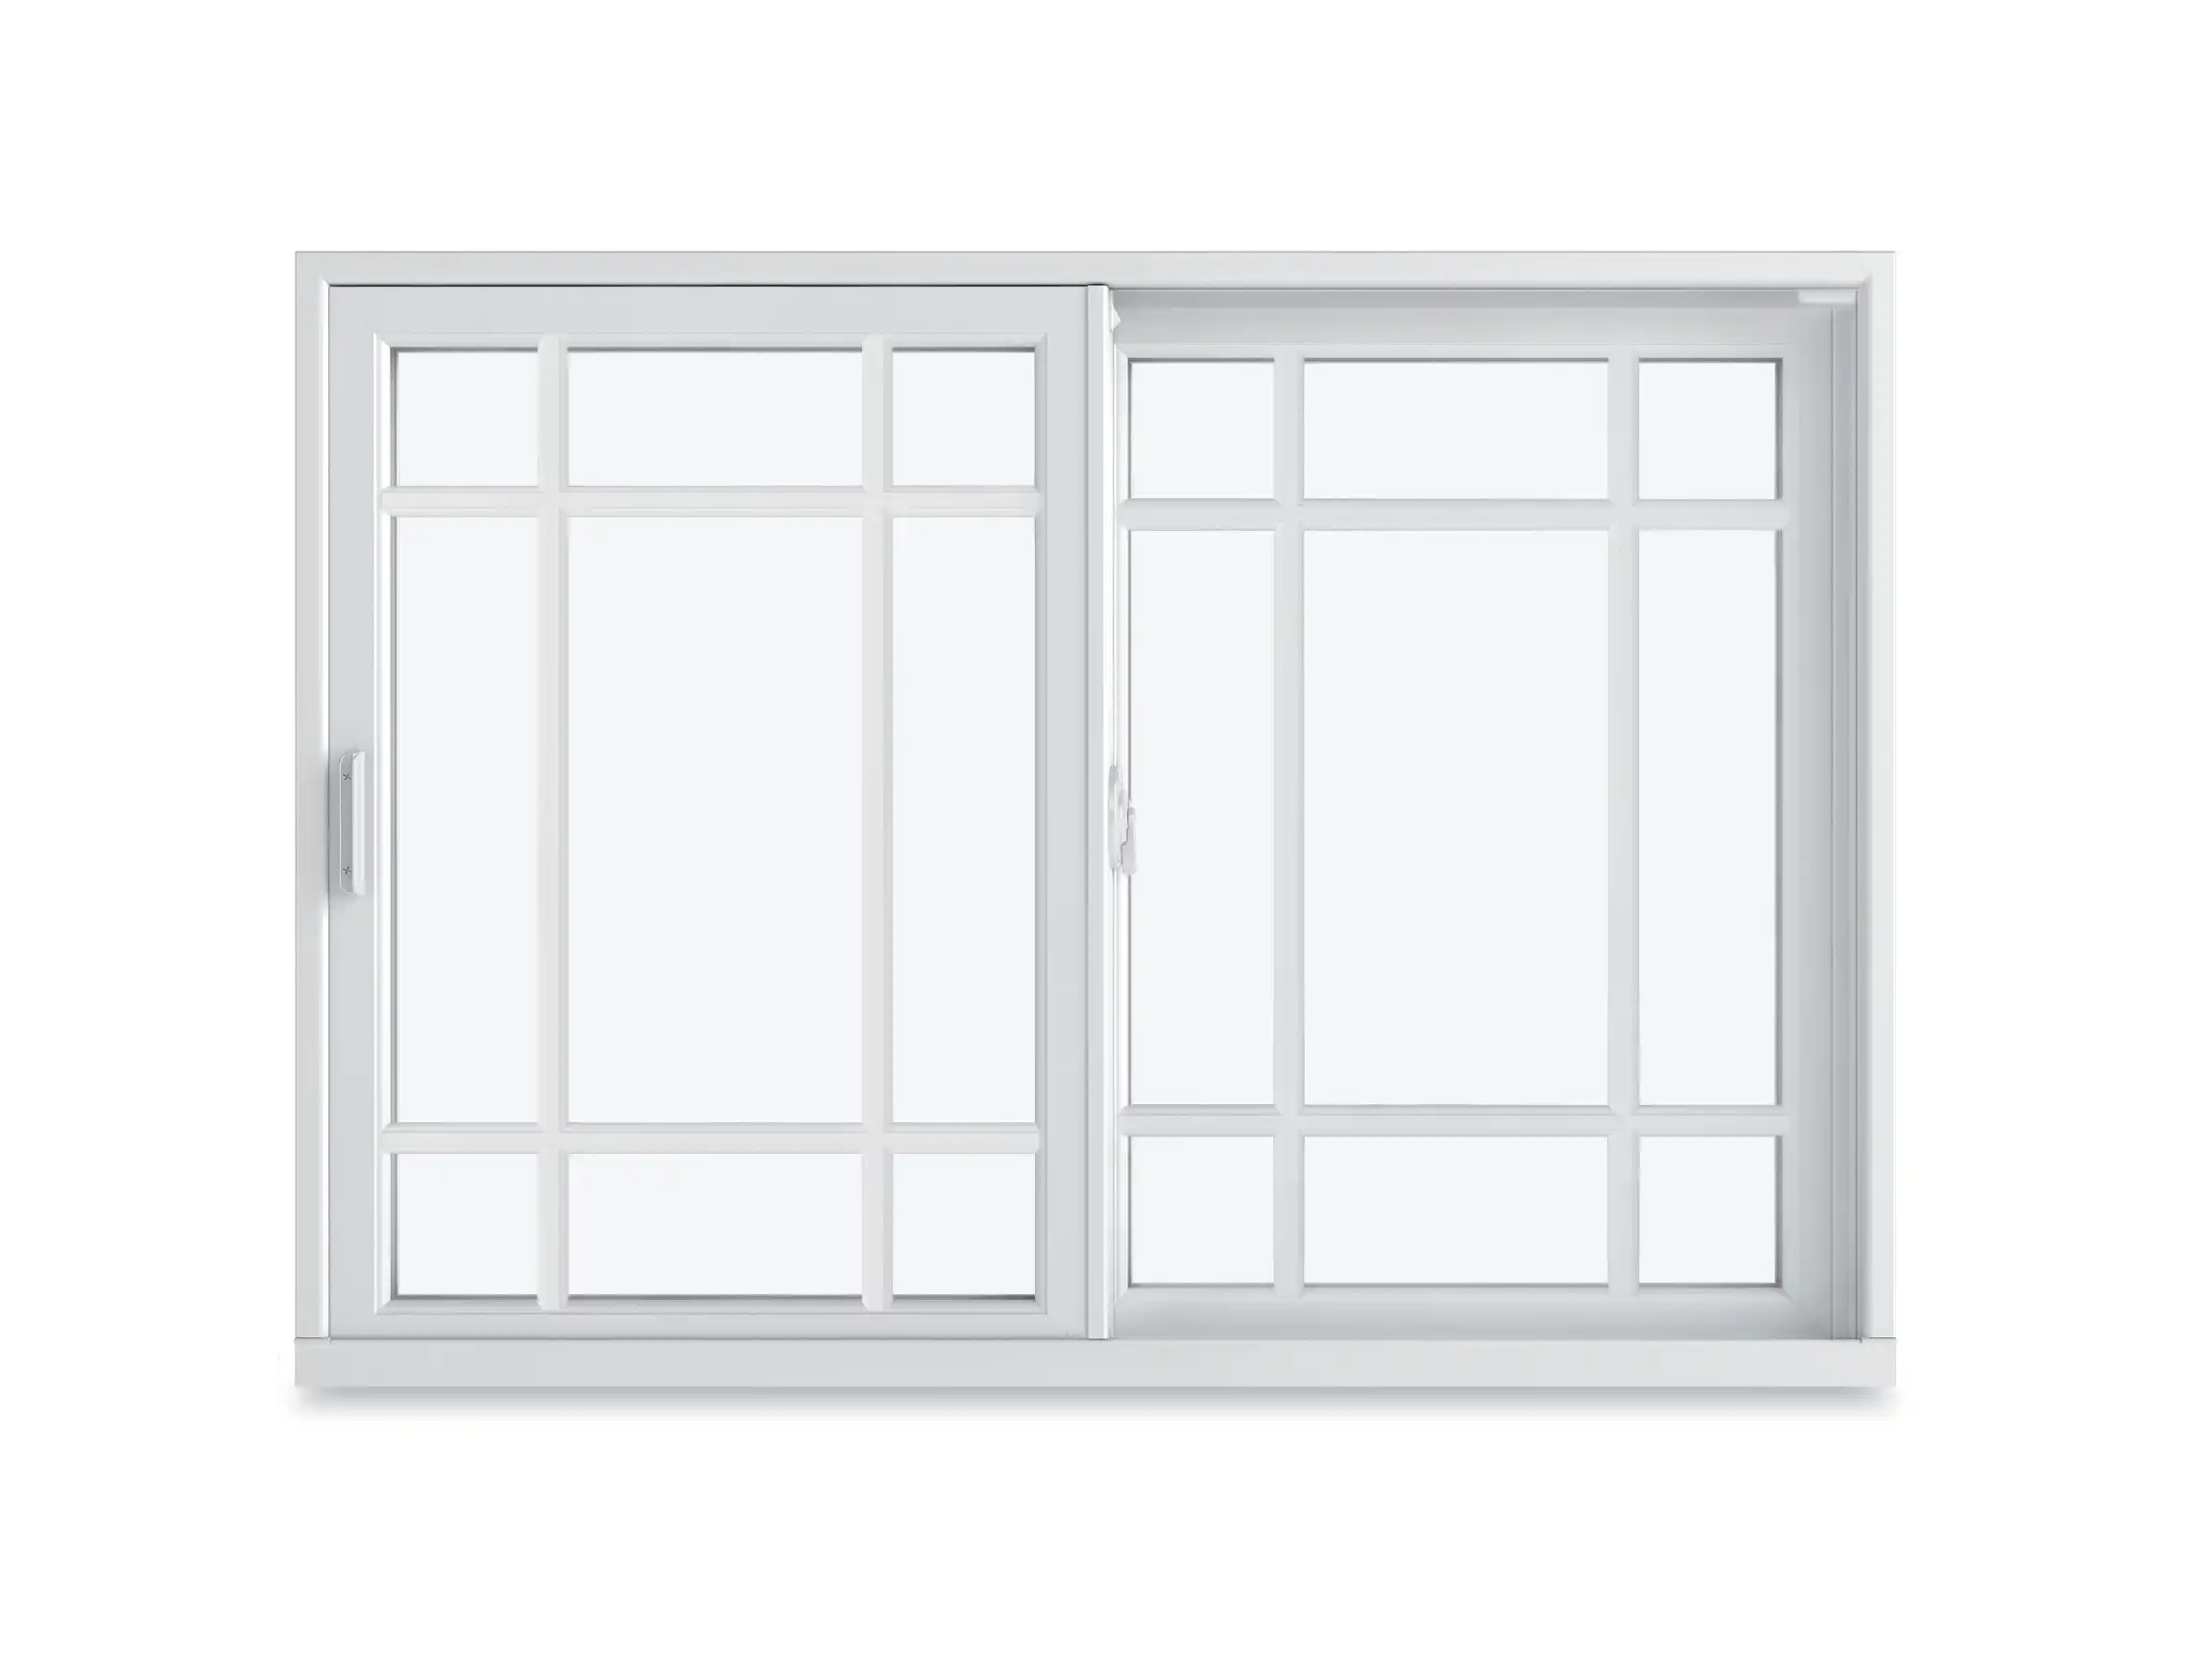 Image of a white Marvin Replacement Slider window with a Prairie Nine Lite Divided Lite style.